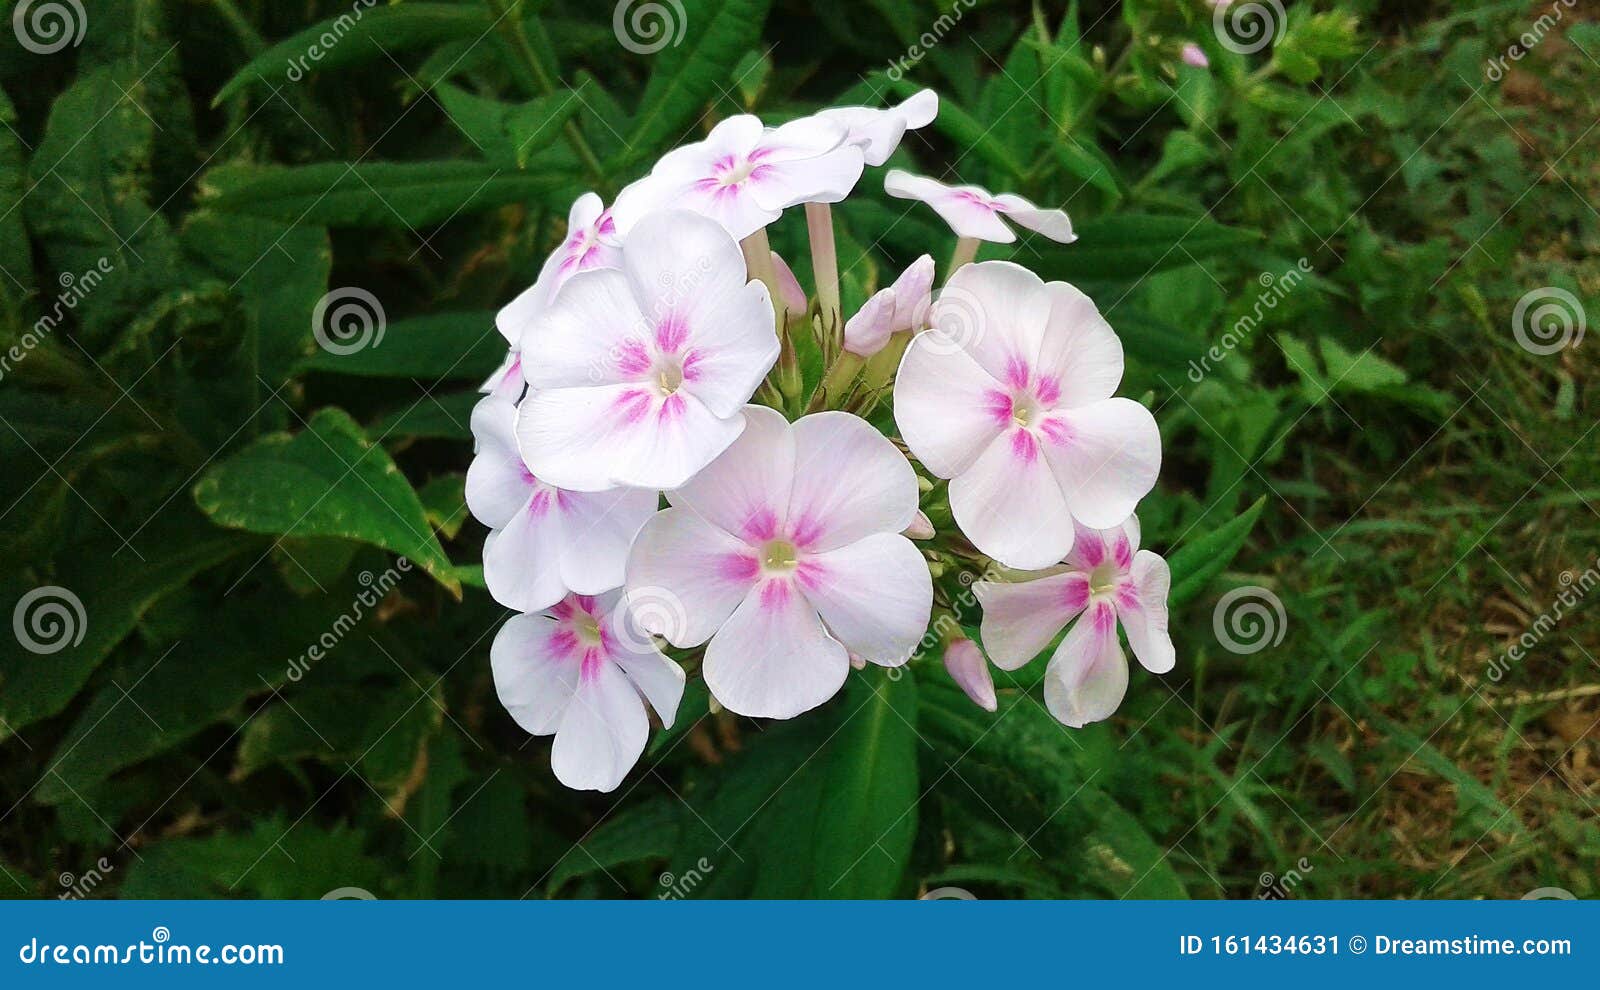 Growing Phlox Stock Image Image Of Flora Leaves Nature 161434631